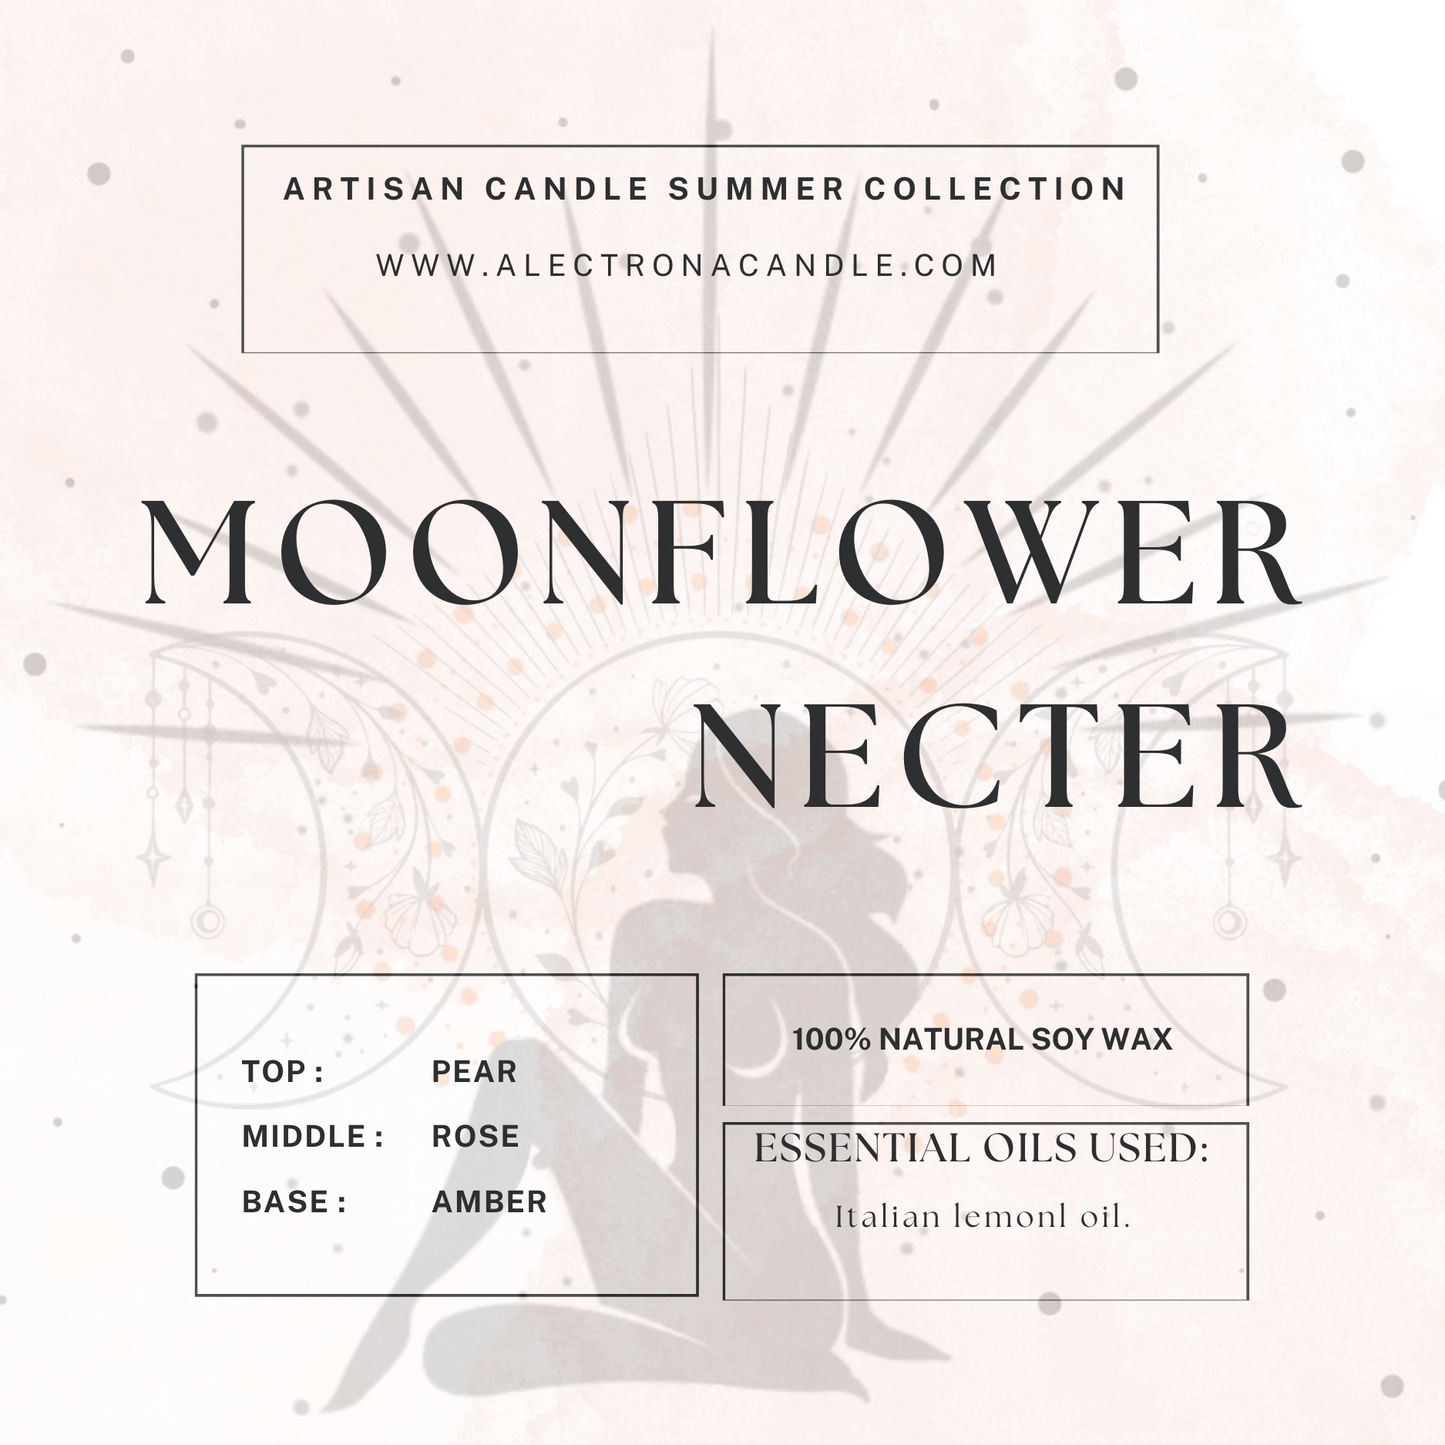 Moonflower Nectar 100% Soy wax candle